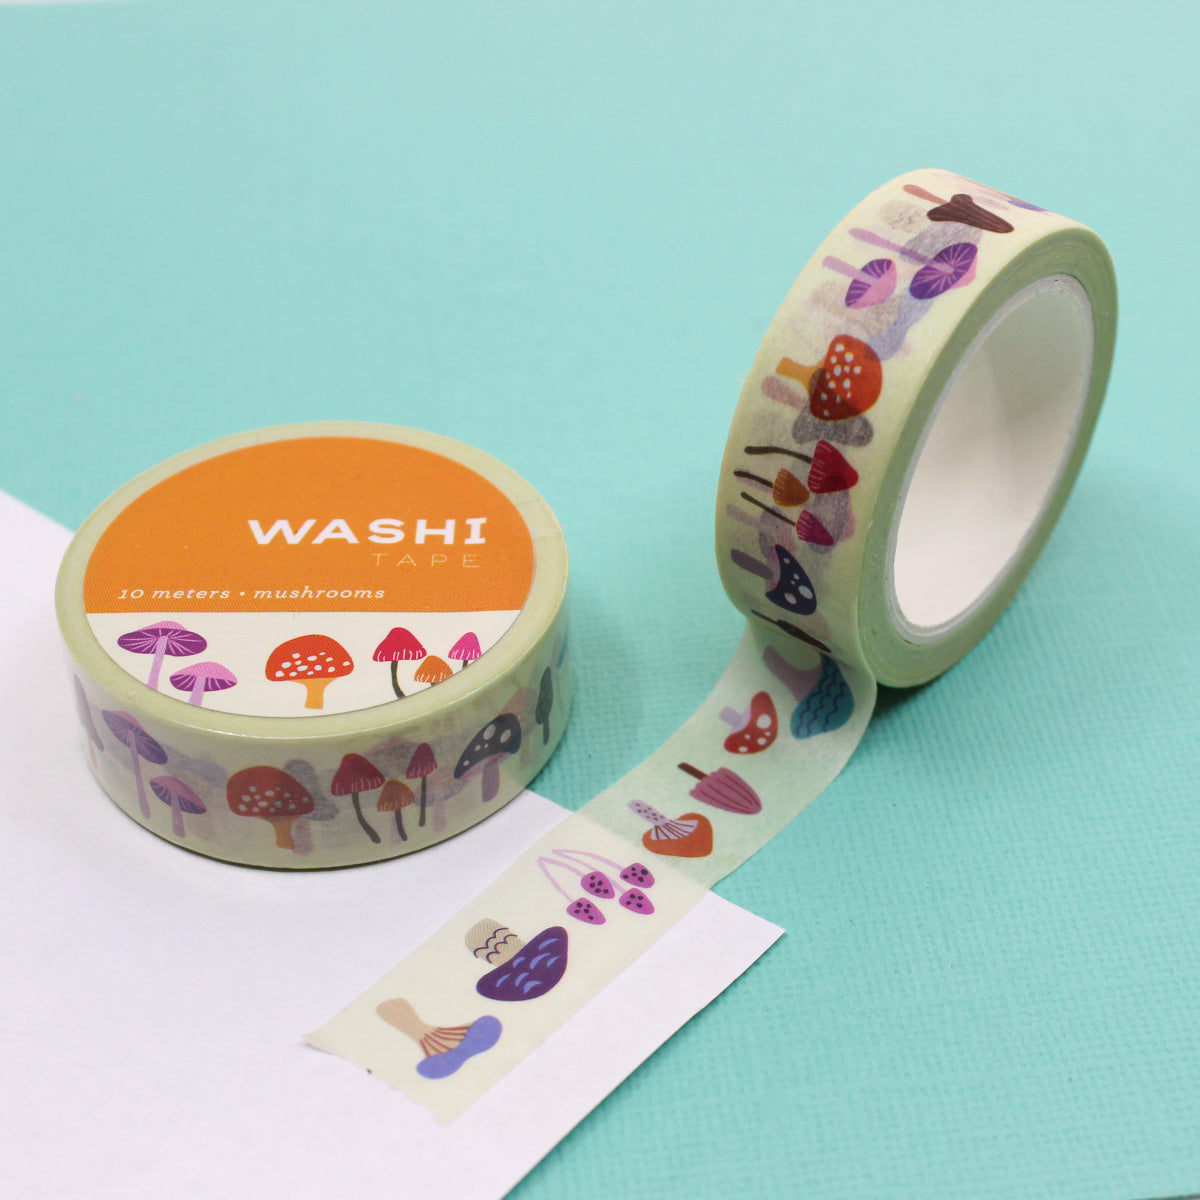 Colorful Playful Mushroom Washi Tape features vibrant and whimsical mushroom designs, adding a playful touch to your crafts, journals, and projects. This tape is from Girl of All Work and sold at BBB Supplies Craft shop.